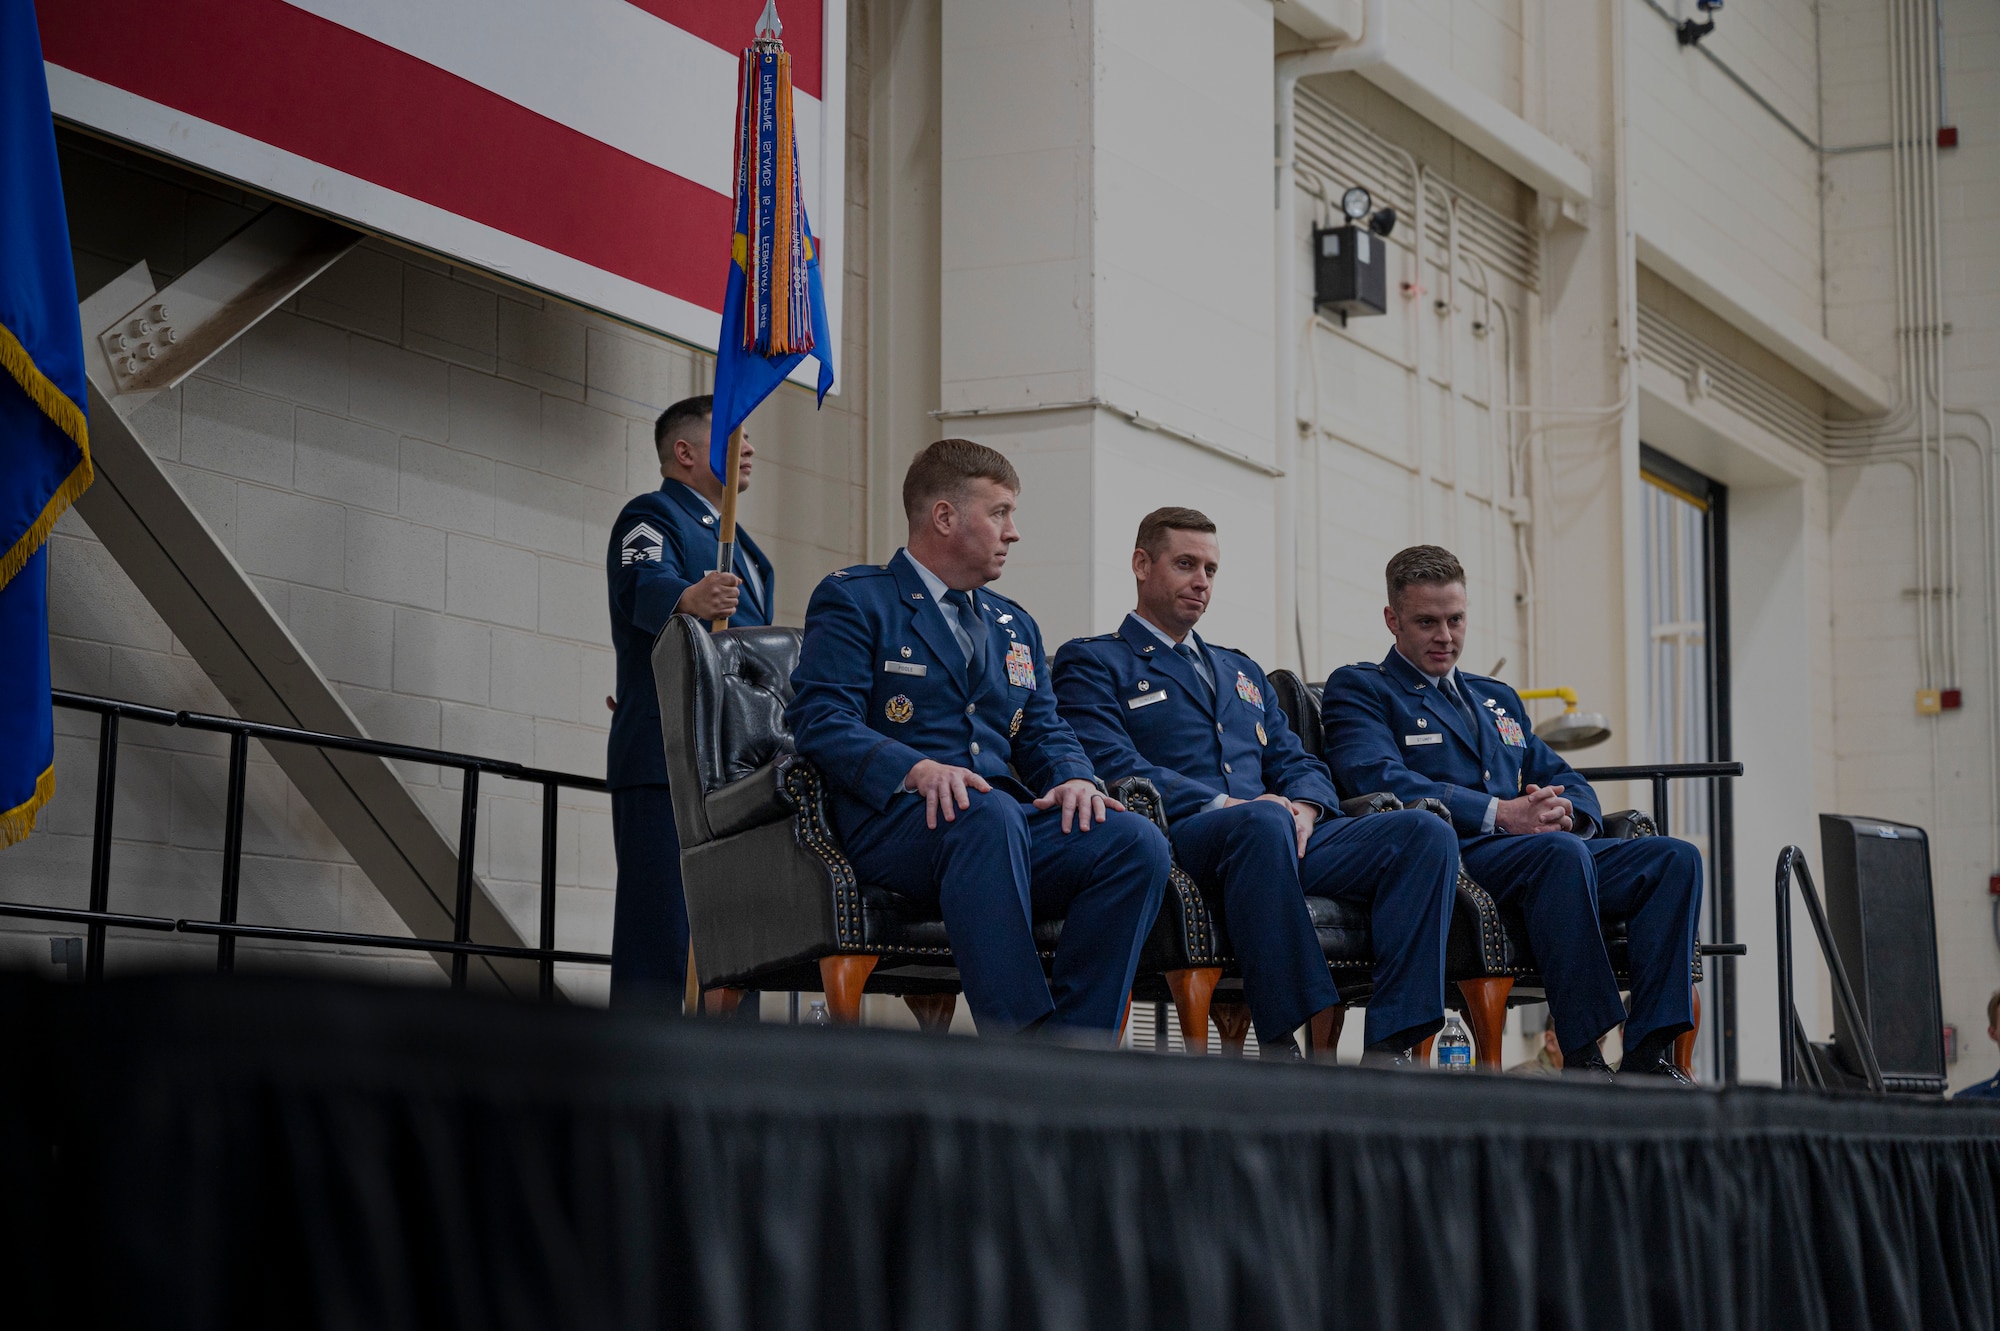 Col. John Poole, 317th Operations Group commander, Lt. Col. Samuel Dunlap, outgoing 40th Airlift Squadron commander, and Lt. Col. Sean Stumpf, incoming 40th AS commander, sit on stage during the 40th AS change of command ceremony at Dyess Air Force Base, Texas, Feb. 3, 2023. The 40th AS supports theater commanders' requirements with combat-delivery capability through tactical airland and airdrop operations as well as humanitarian efforts and aeromedical evacuation. (U.S. Air Force photo by Senior Airman Colin Hollowell)